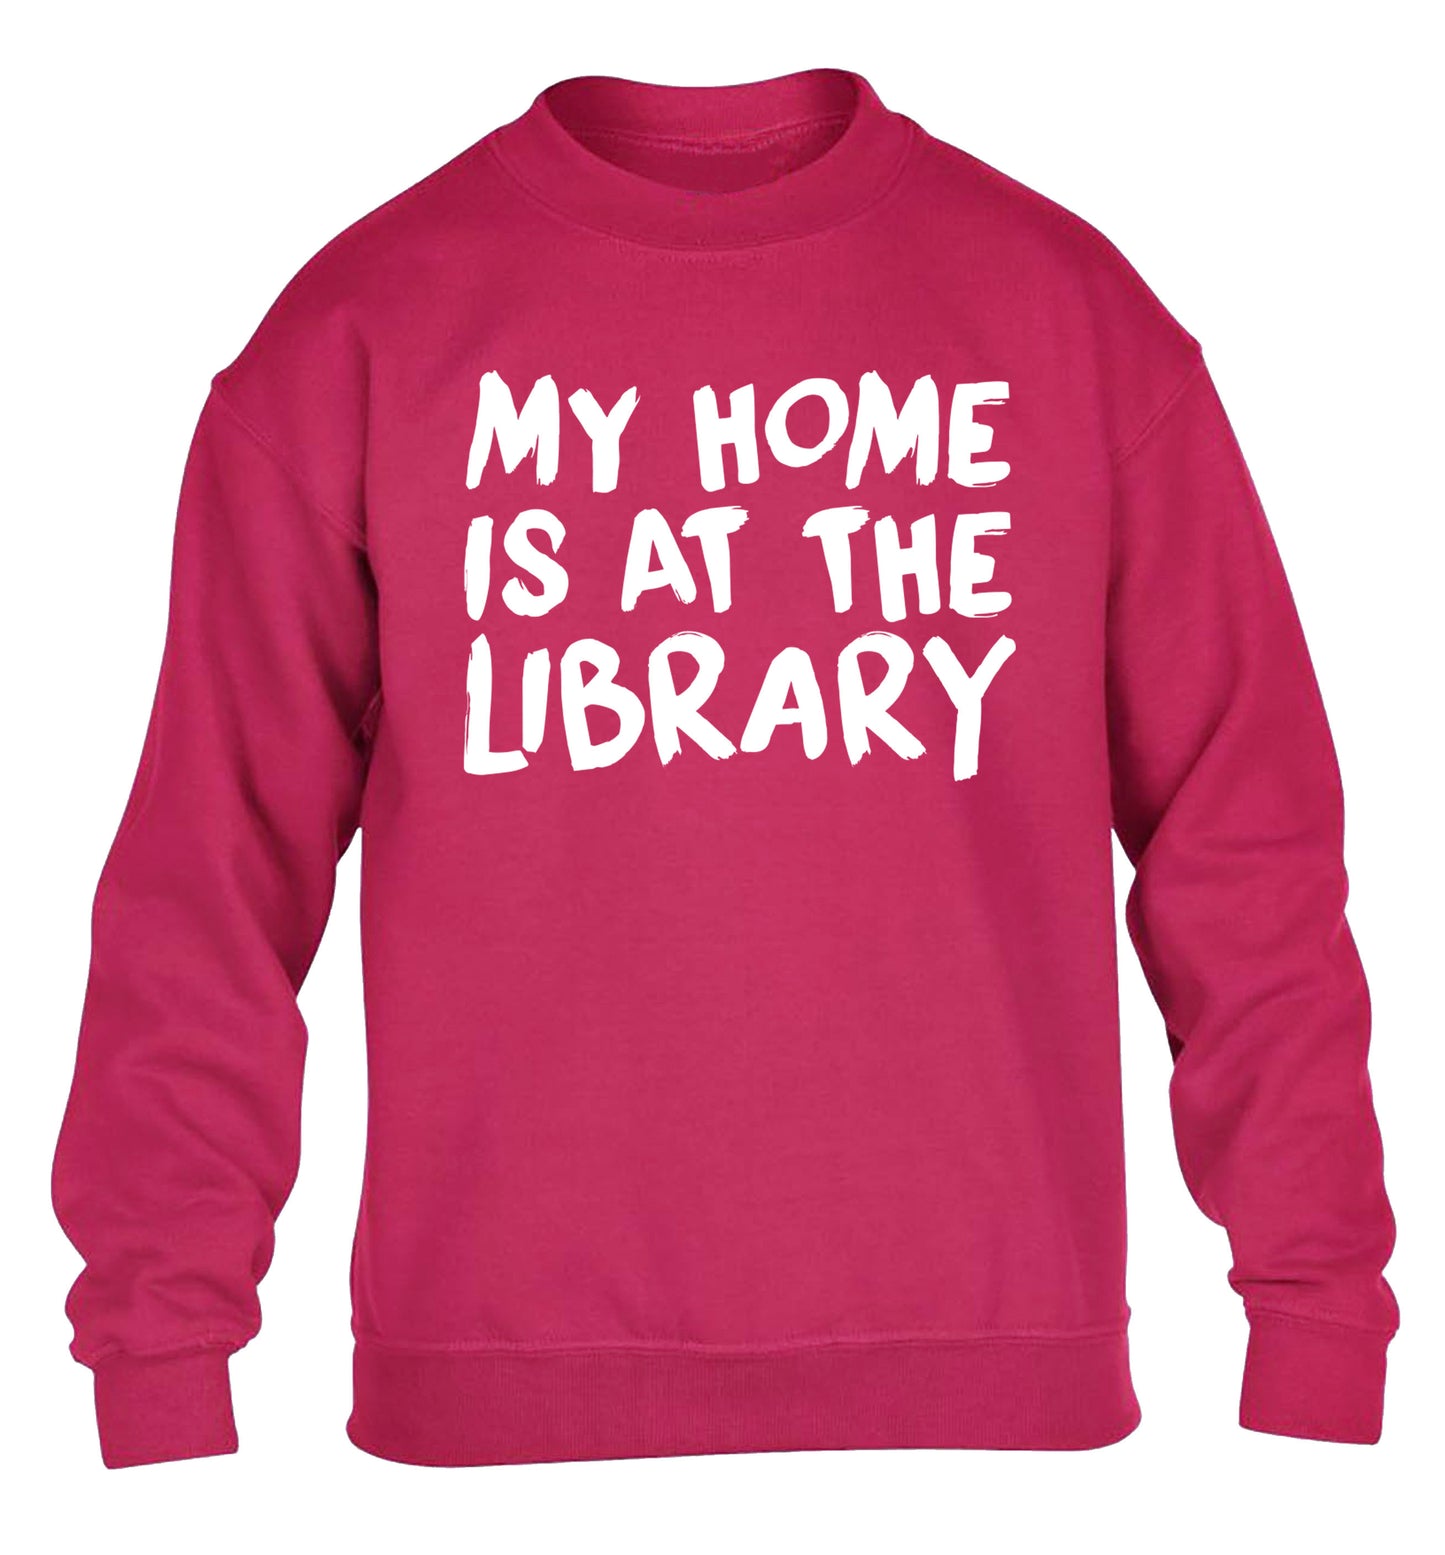 My home is at the library children's pink sweater 12-14 Years